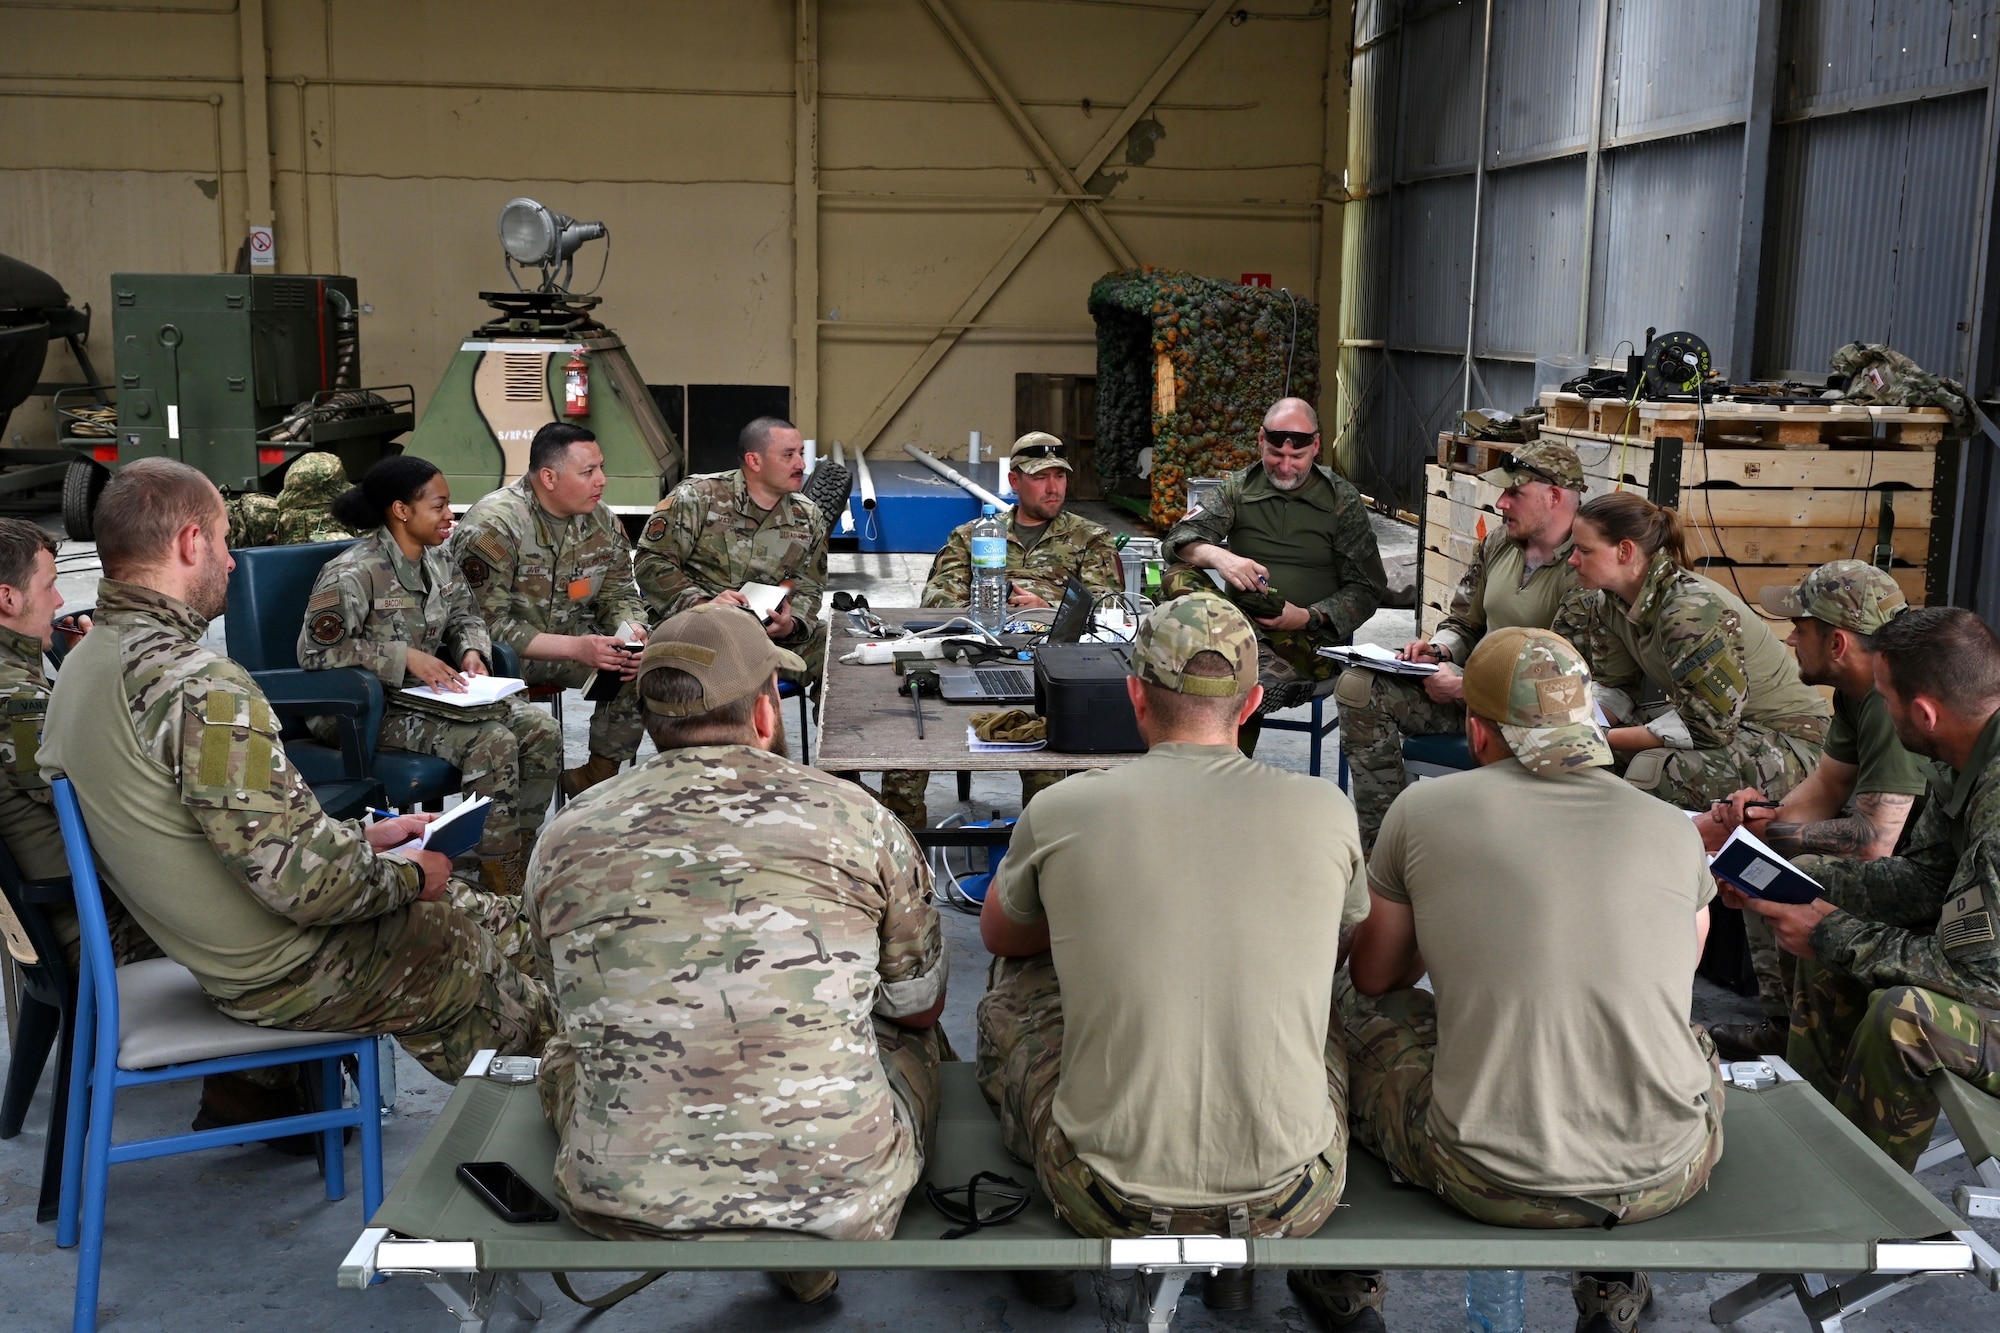 U.S. Air Force Airmen, assigned to the 521st Air Mobility Operations Wing, and Dutch soldiers, assigned to the 11th Air Assault Brigade, discuss airlift plans during Exercise Defender Europe 23 at Larissa Air Base, Greece, May 15, 2023.